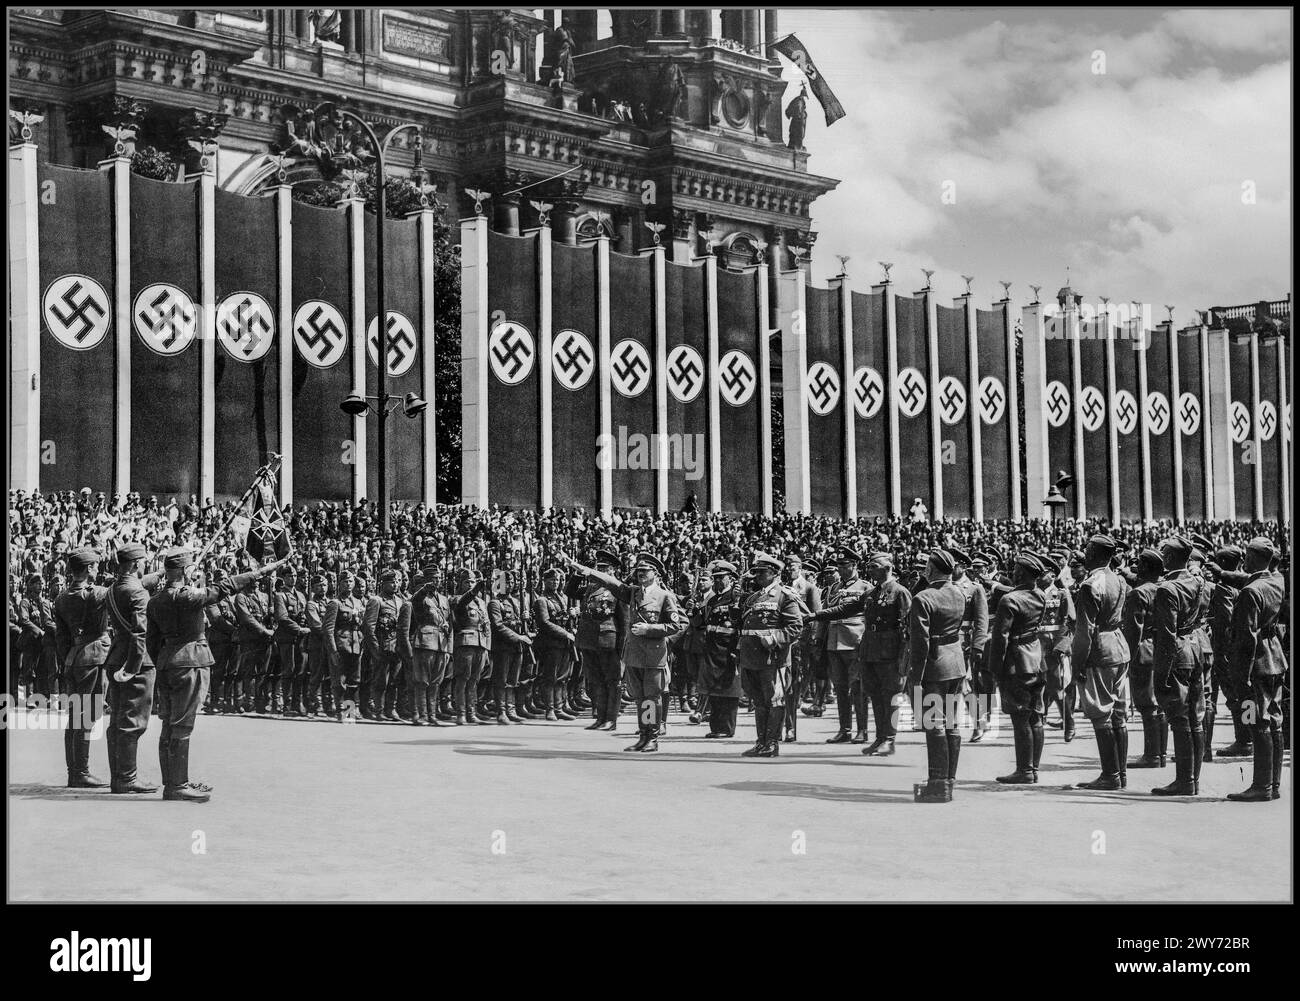 Adolf Hitler in Lustgarten salutes the banner of the Condor Legion. Next to him stand: General Hugo Sperrle (on the left), and on the right: Adm. Erich Raeder, Hermann Goering, General Wilhelm Keitel, General Wolfram von Richthofen. The Berlin Cathedral building can be seen in the background. Date 6 June 1939 Adolf Hitler salutes troops of the Condor Legion who fought alongside Spanish Nationalists in the Spanish civil war Berlin Nazi Germany Stock Photo